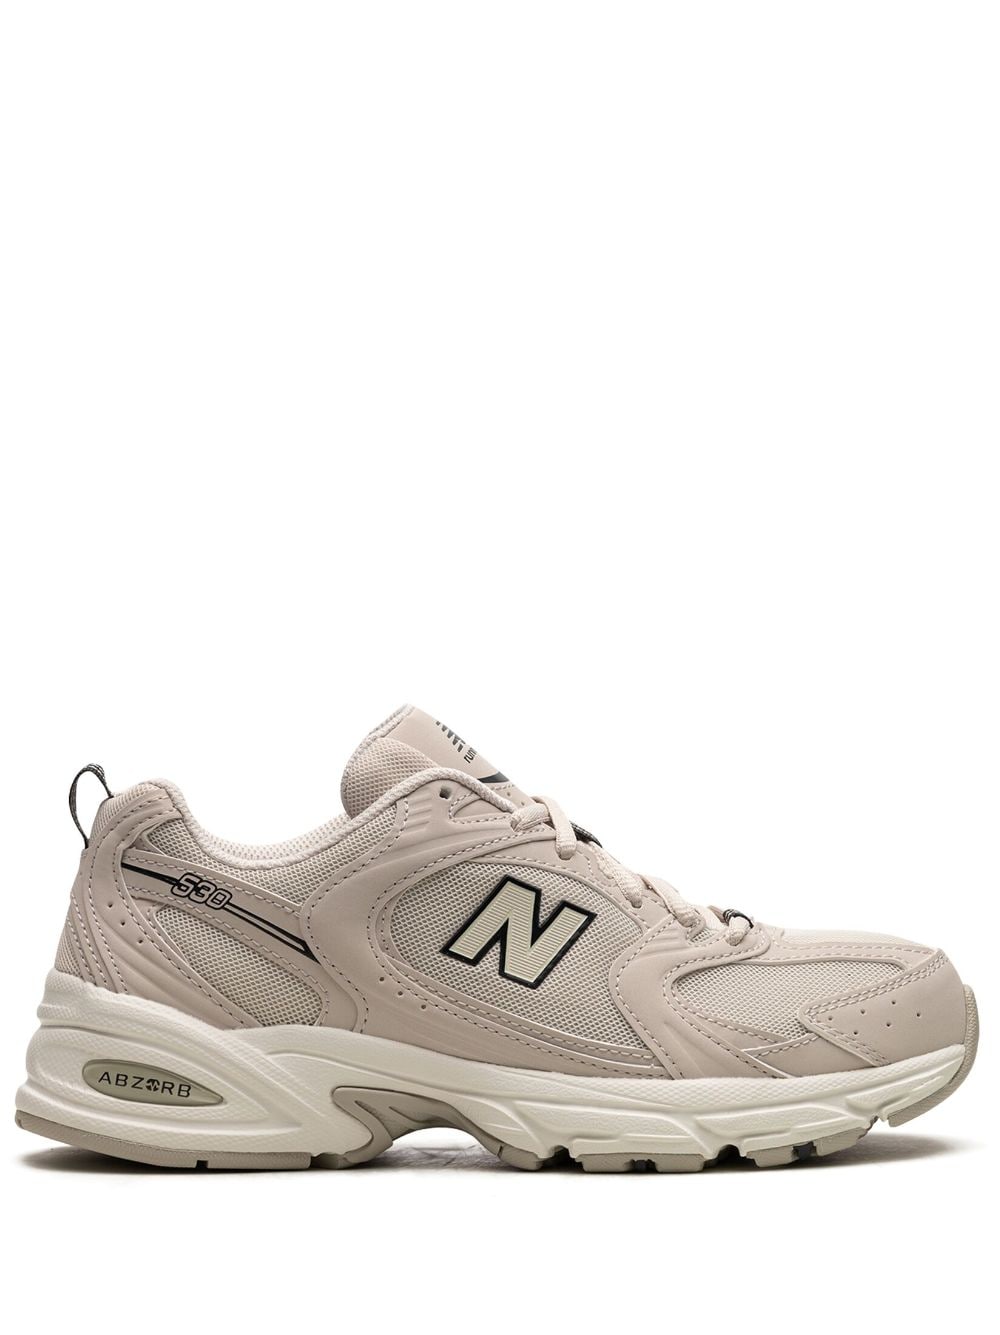 New Balance "530 ""Ivory"" sneakers" - Beige